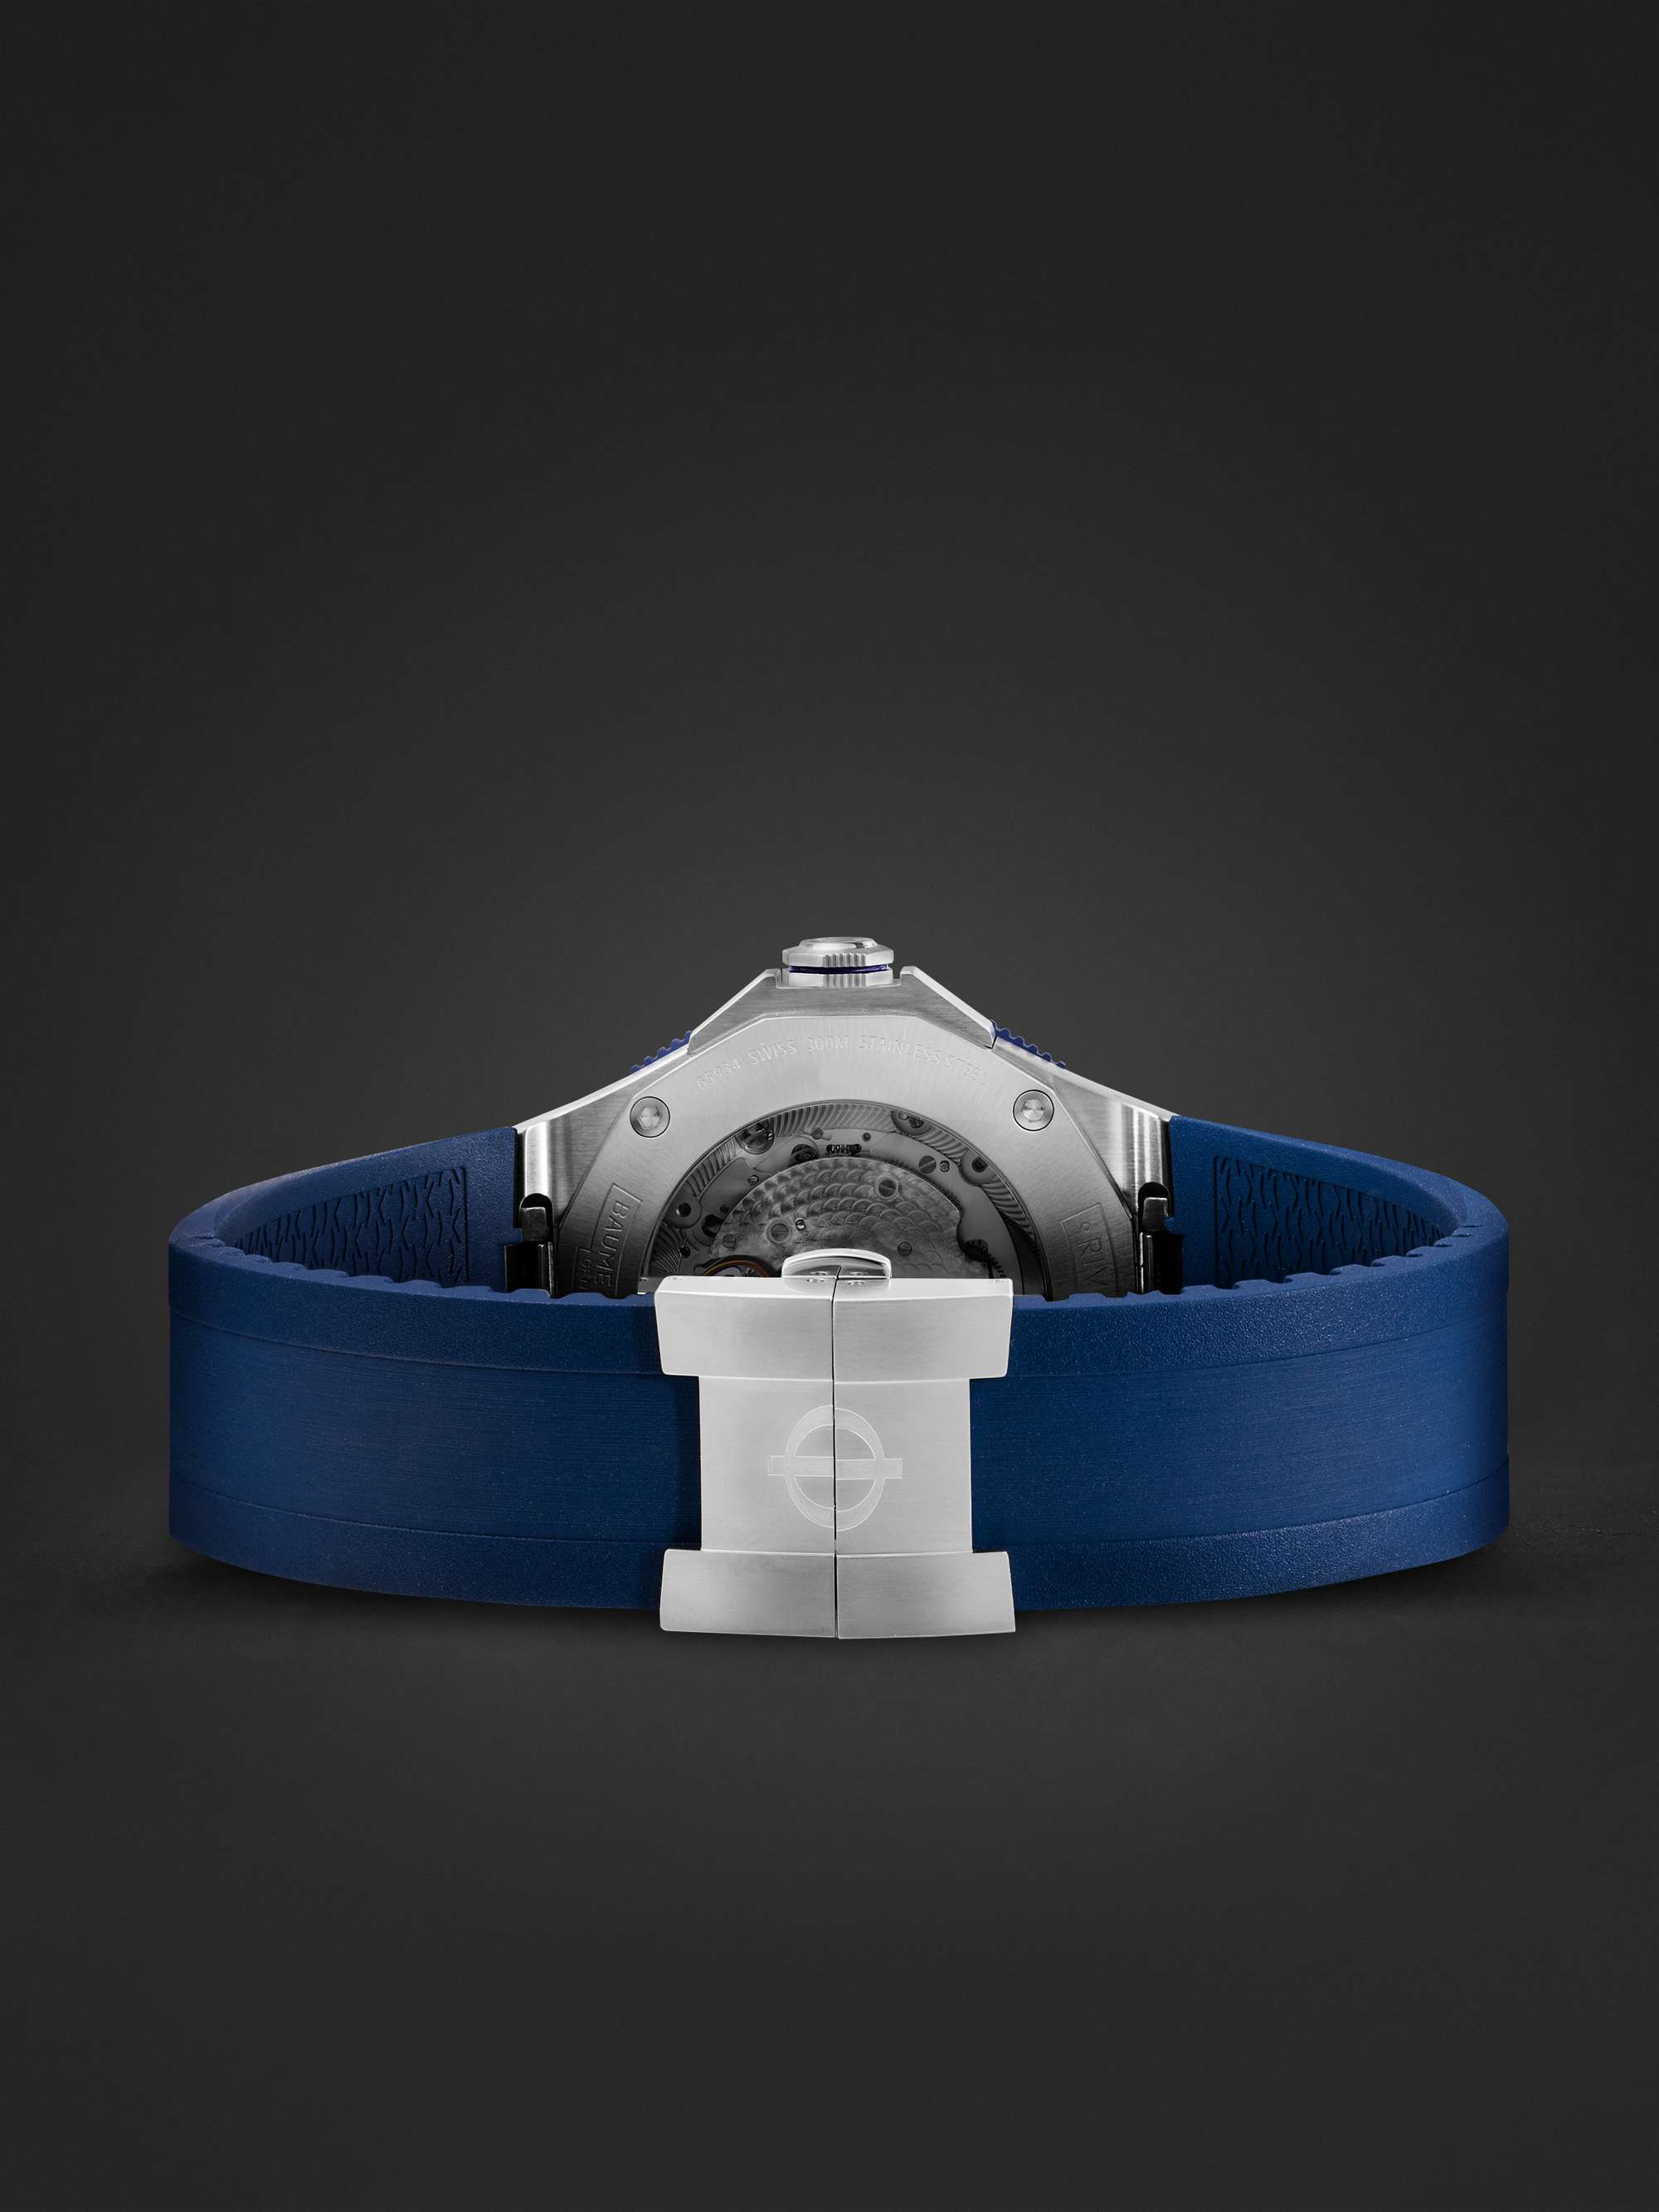 UNIMATIC Model Two Limited Edition Automatic 38mm Titanium and TPU